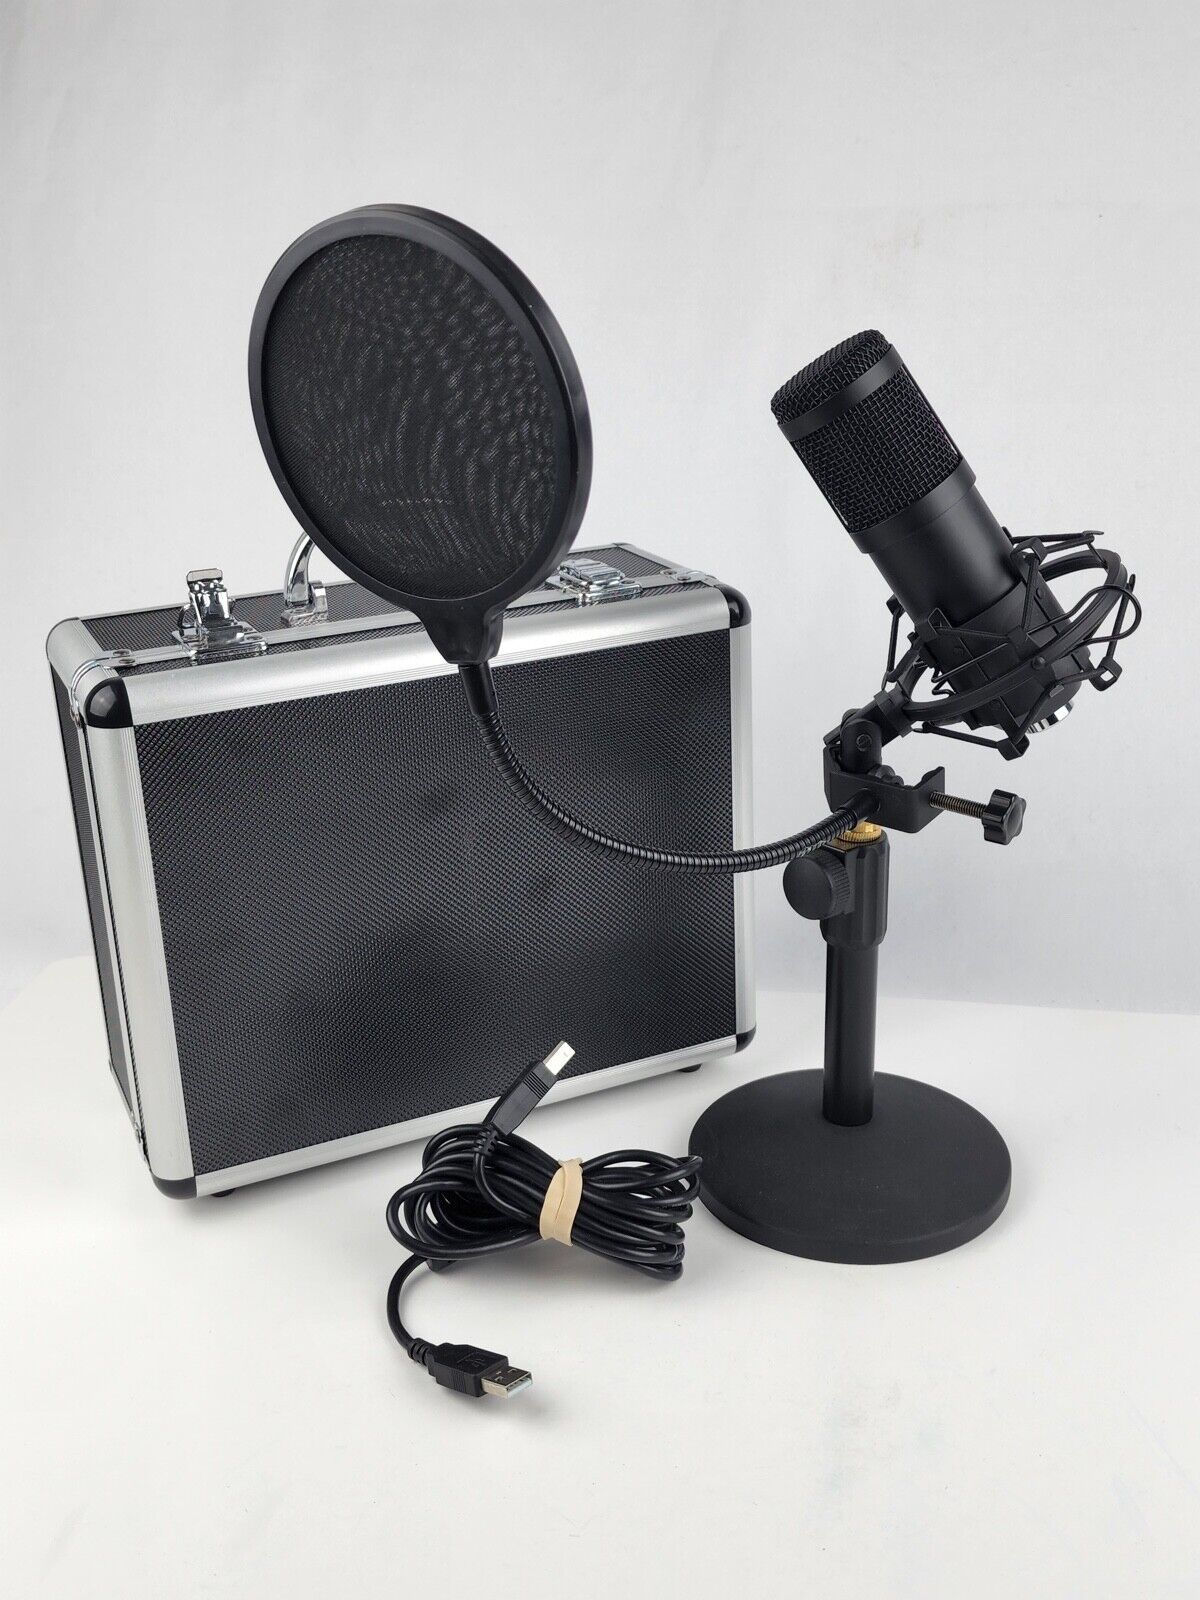 Primary image for Sudotack ST-820 Microphone Kit Streaming Podcast USB w/ Case Stand cord & filter